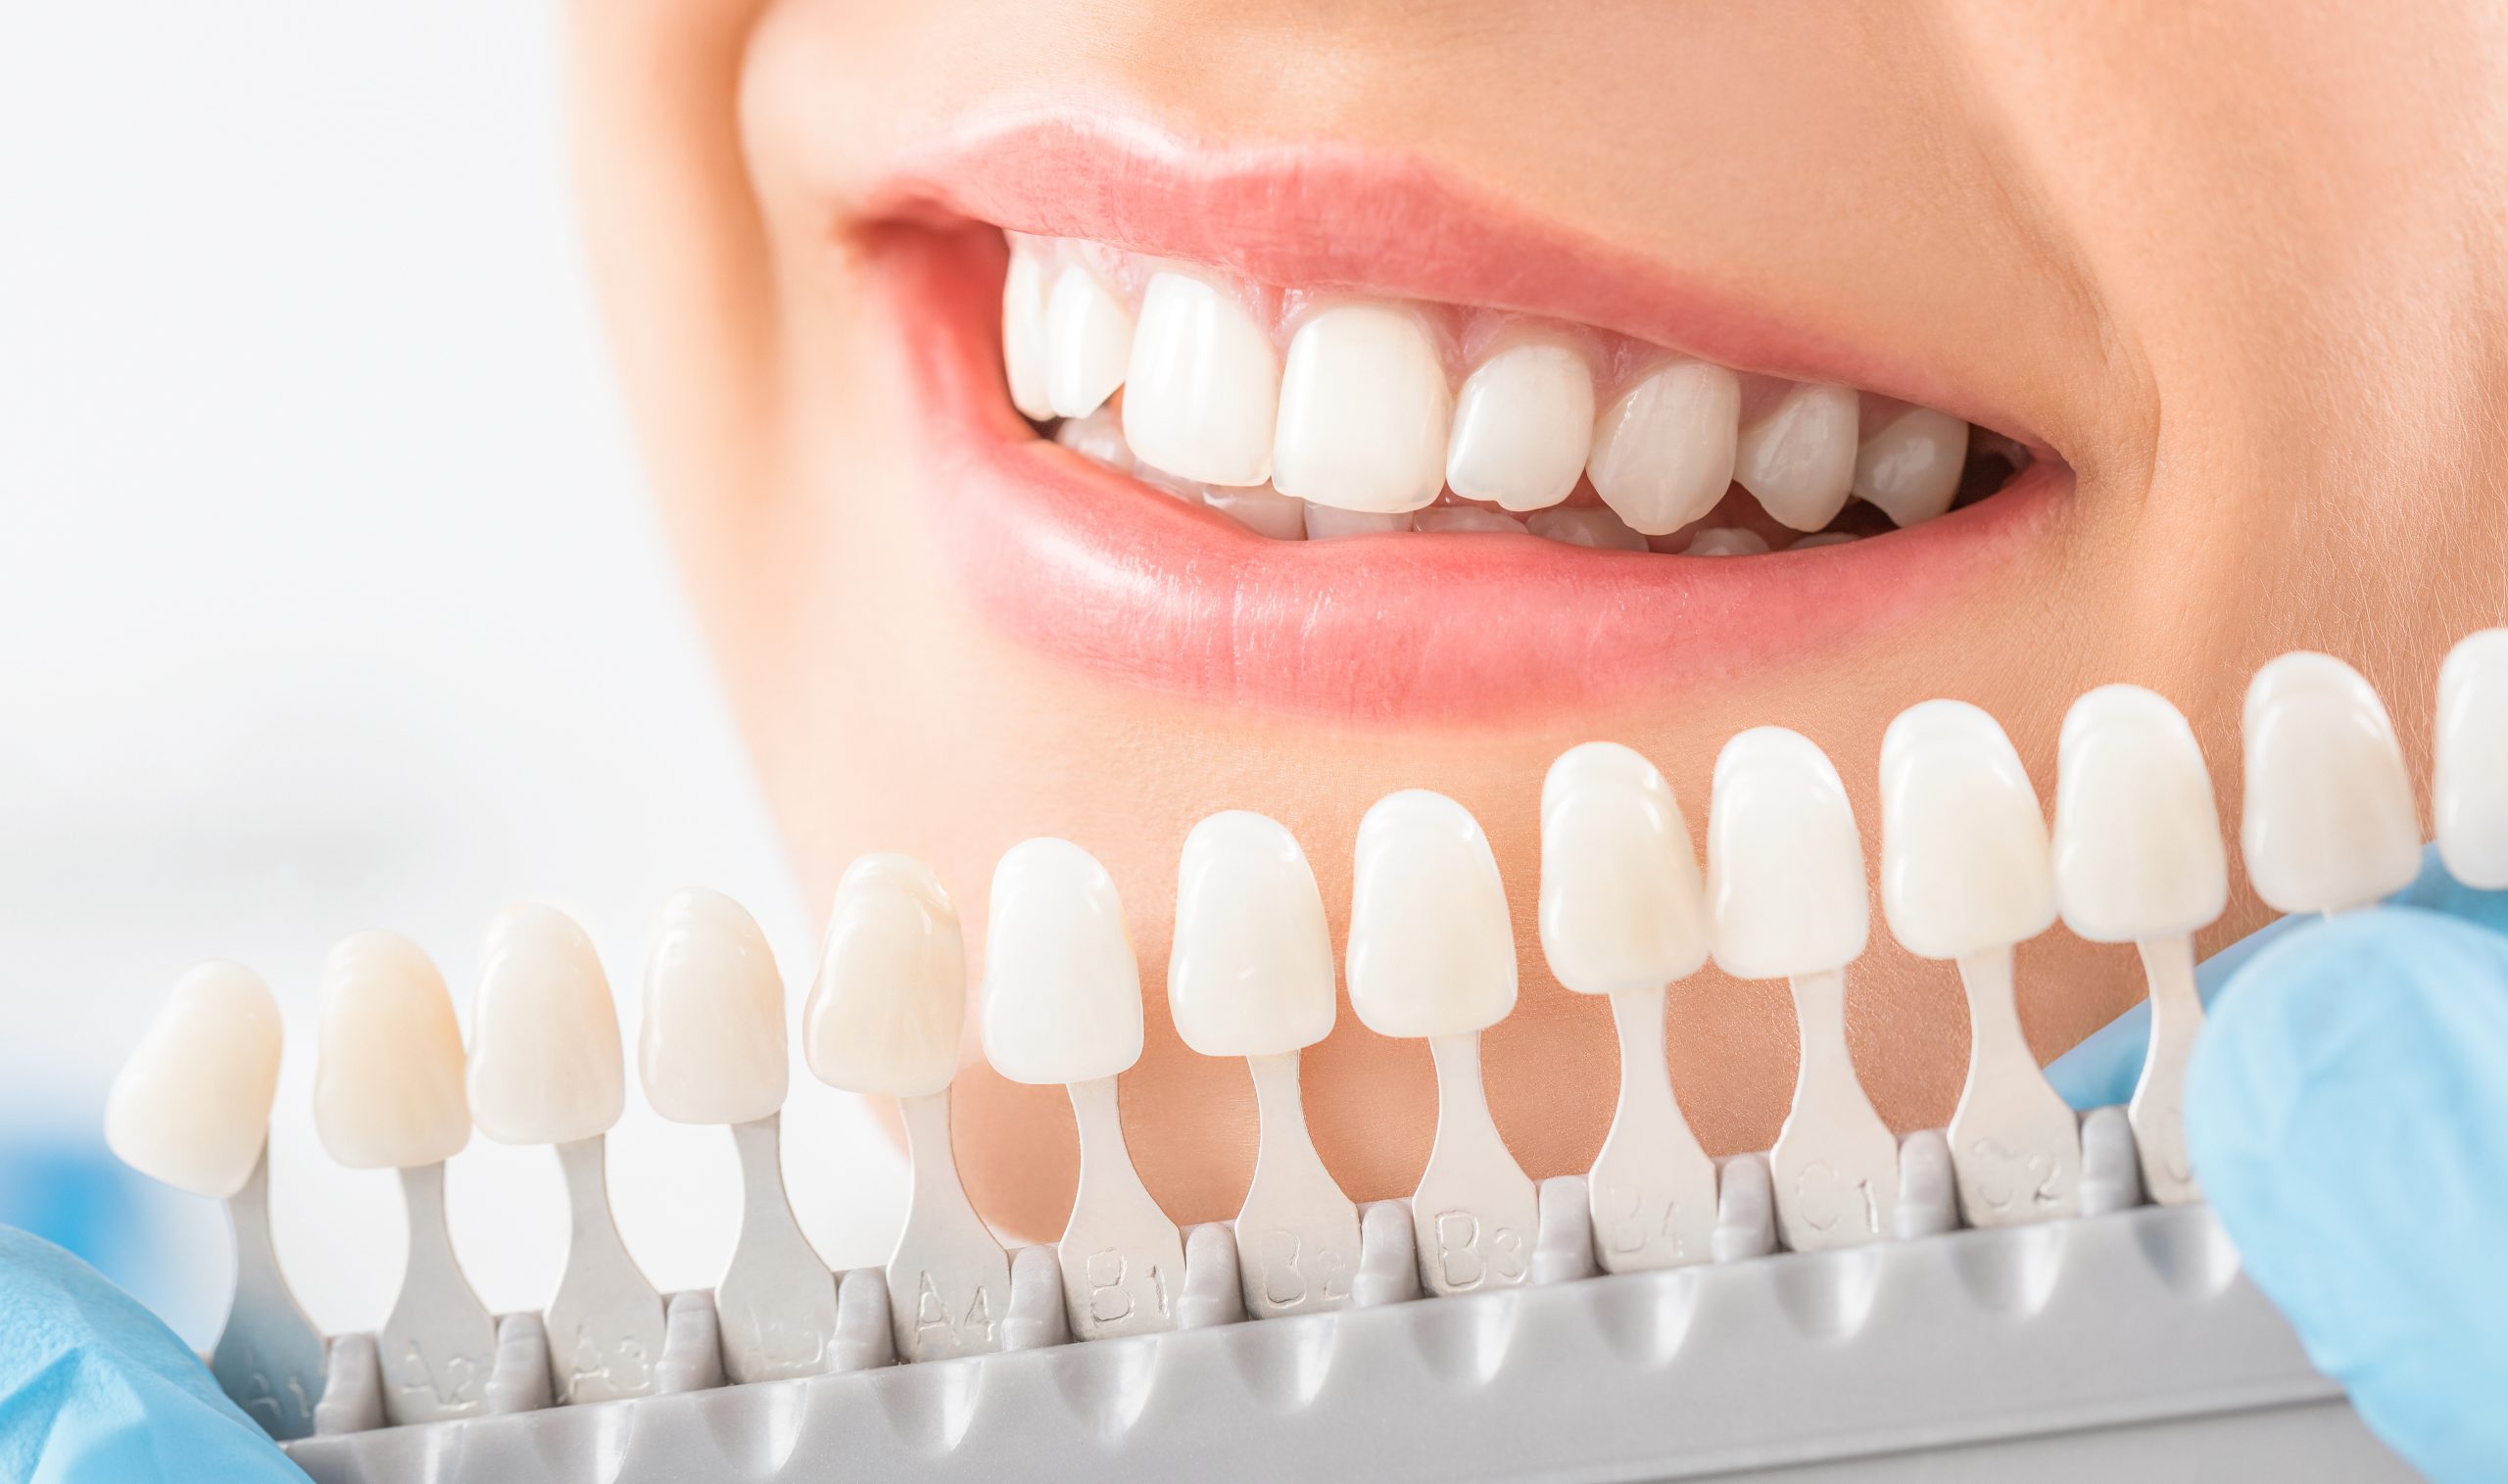 Closeup smile with a teeth whitening scale help next to the smile to compare the tooth color.